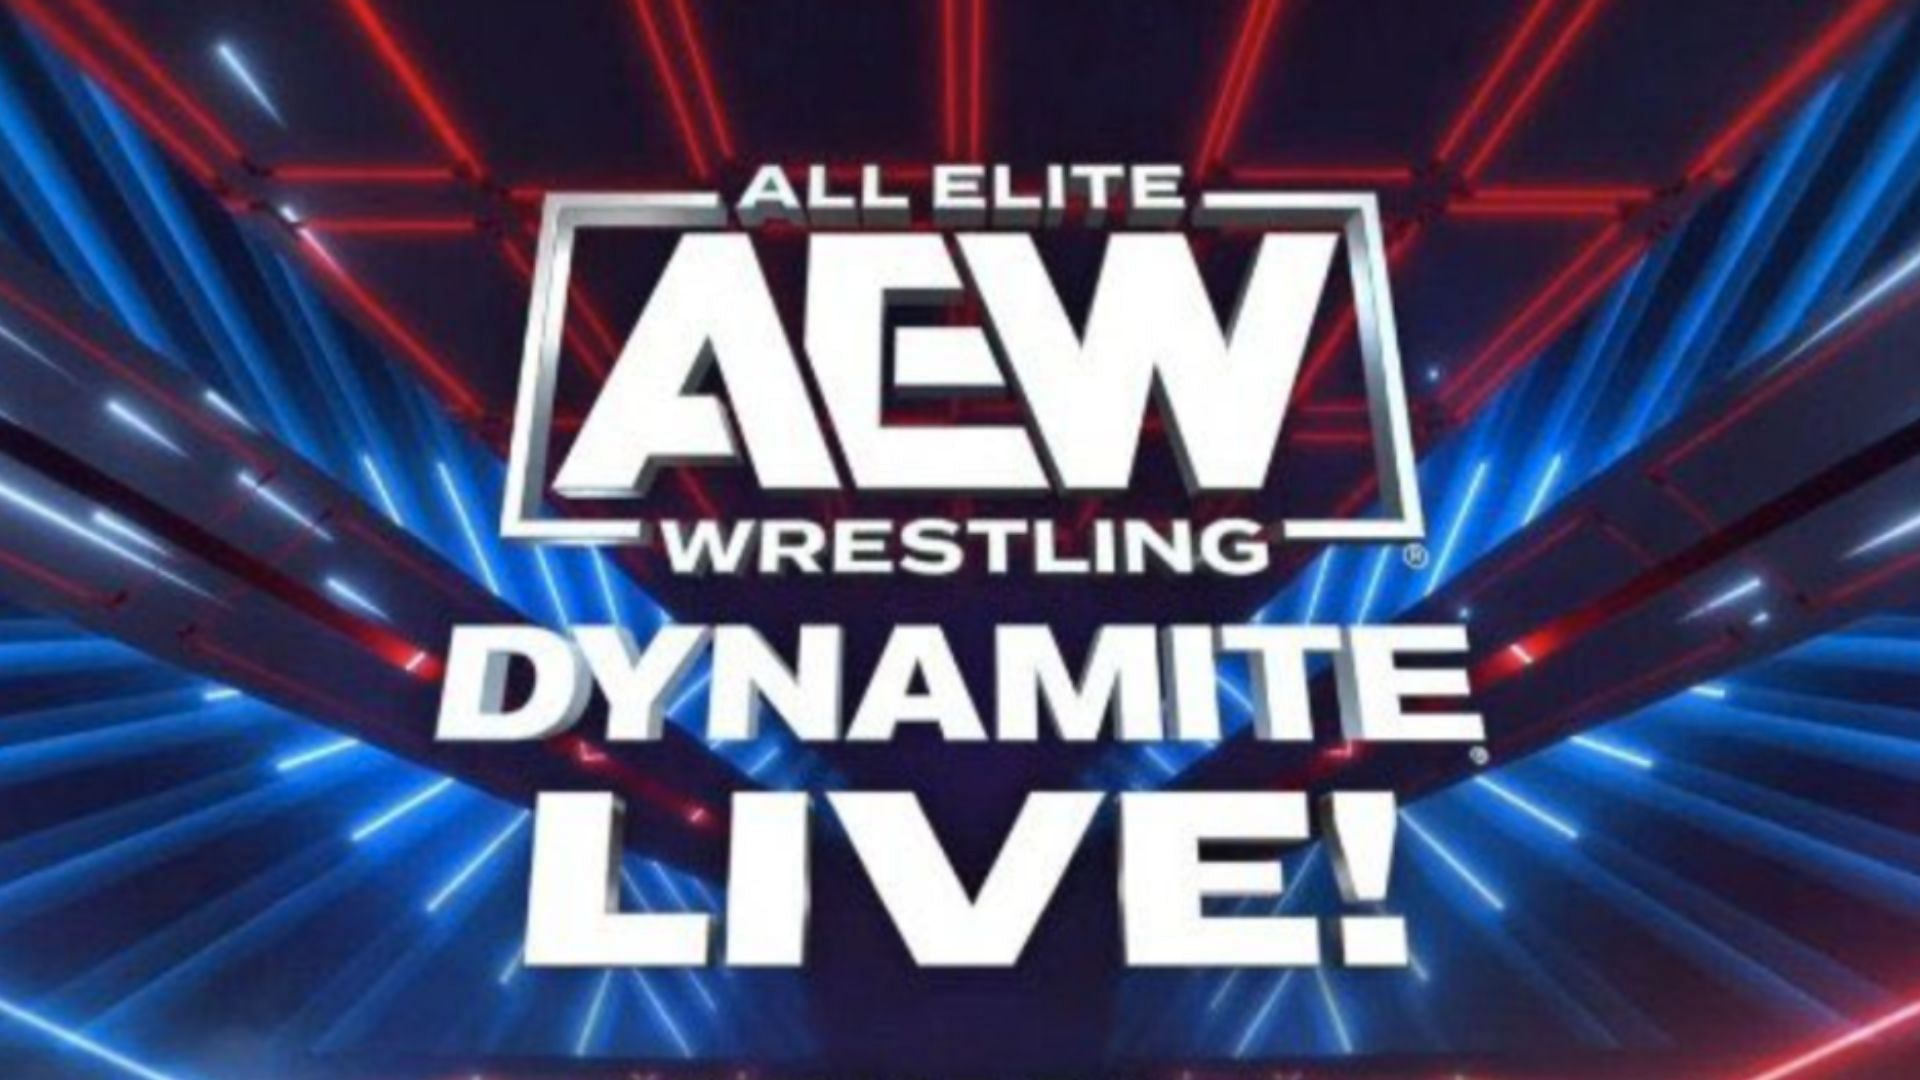 AEW Dynamite saw a lot of action this week!